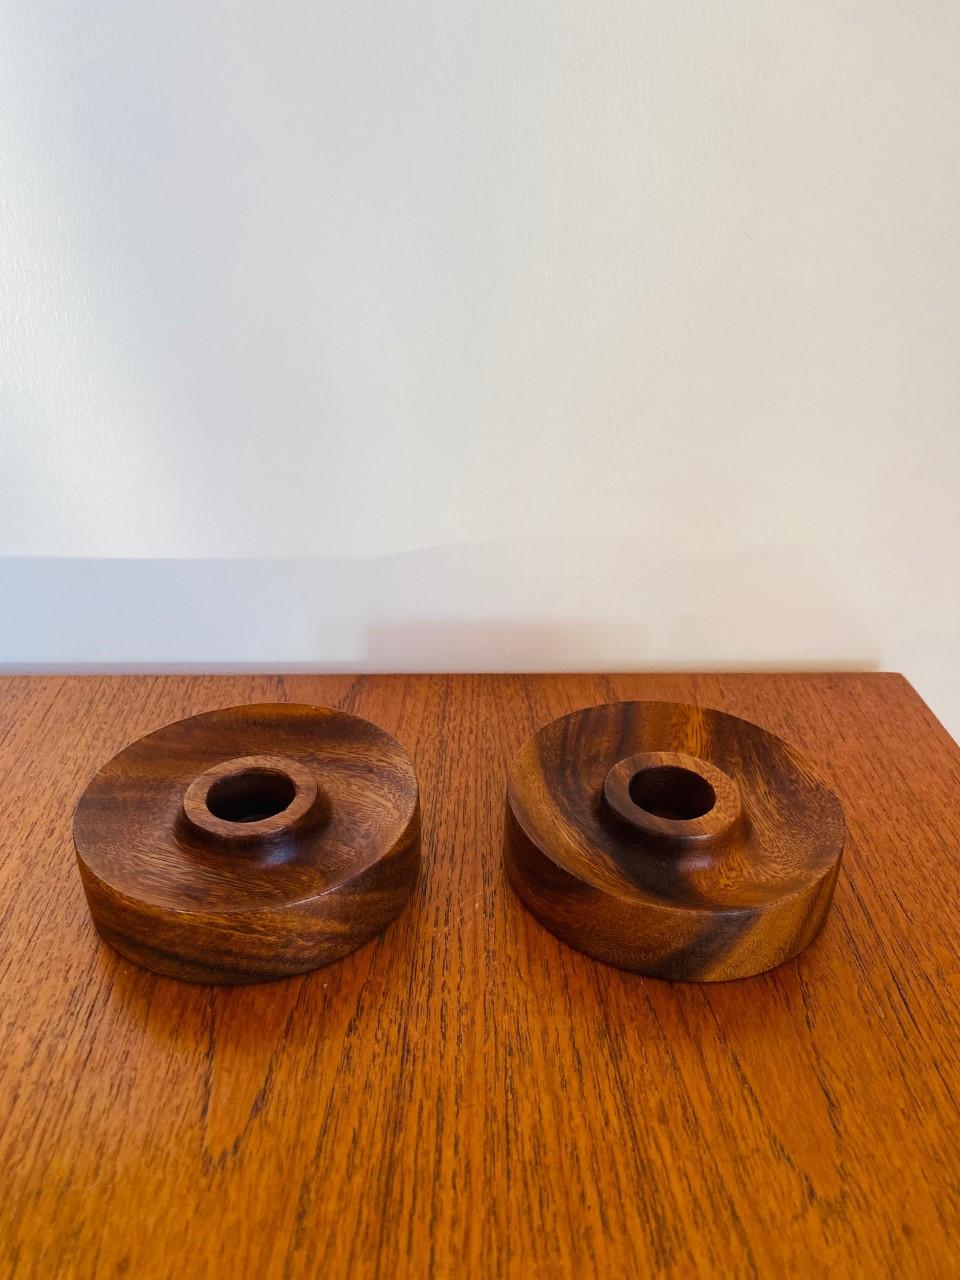 Scandinavian Modern Pair of Circular Candleholders in the style of Dansk  For Sale